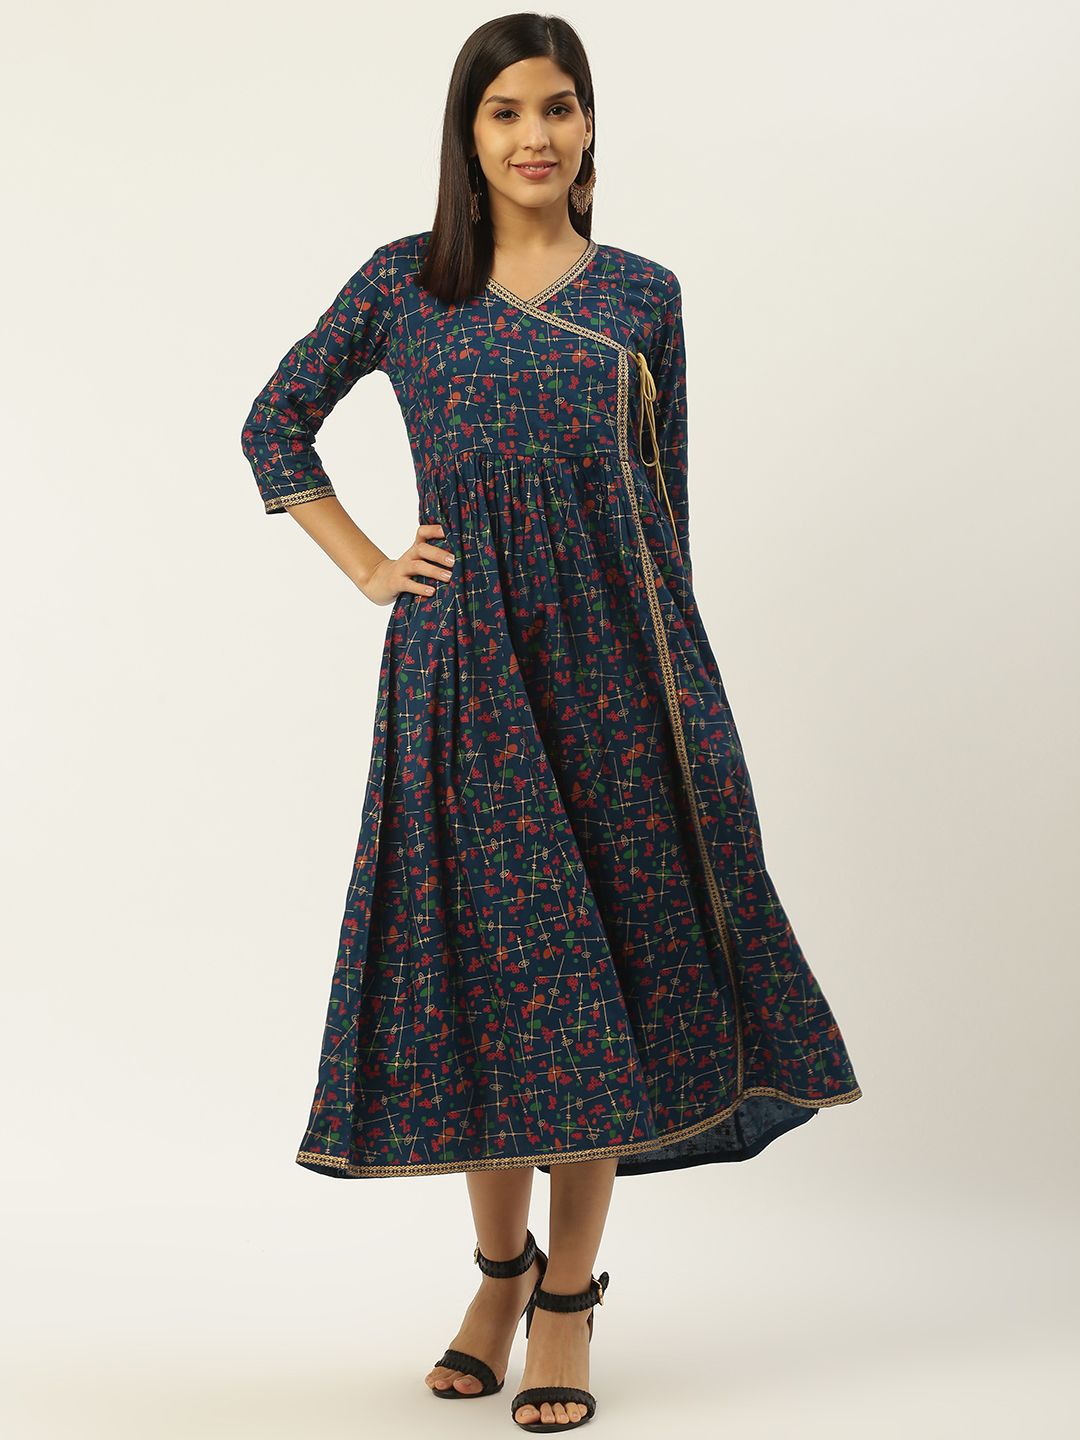 RANGMAYEE Women Navy Blue & Red Floral Foil Print Angrakha A-Line Dress Price in India